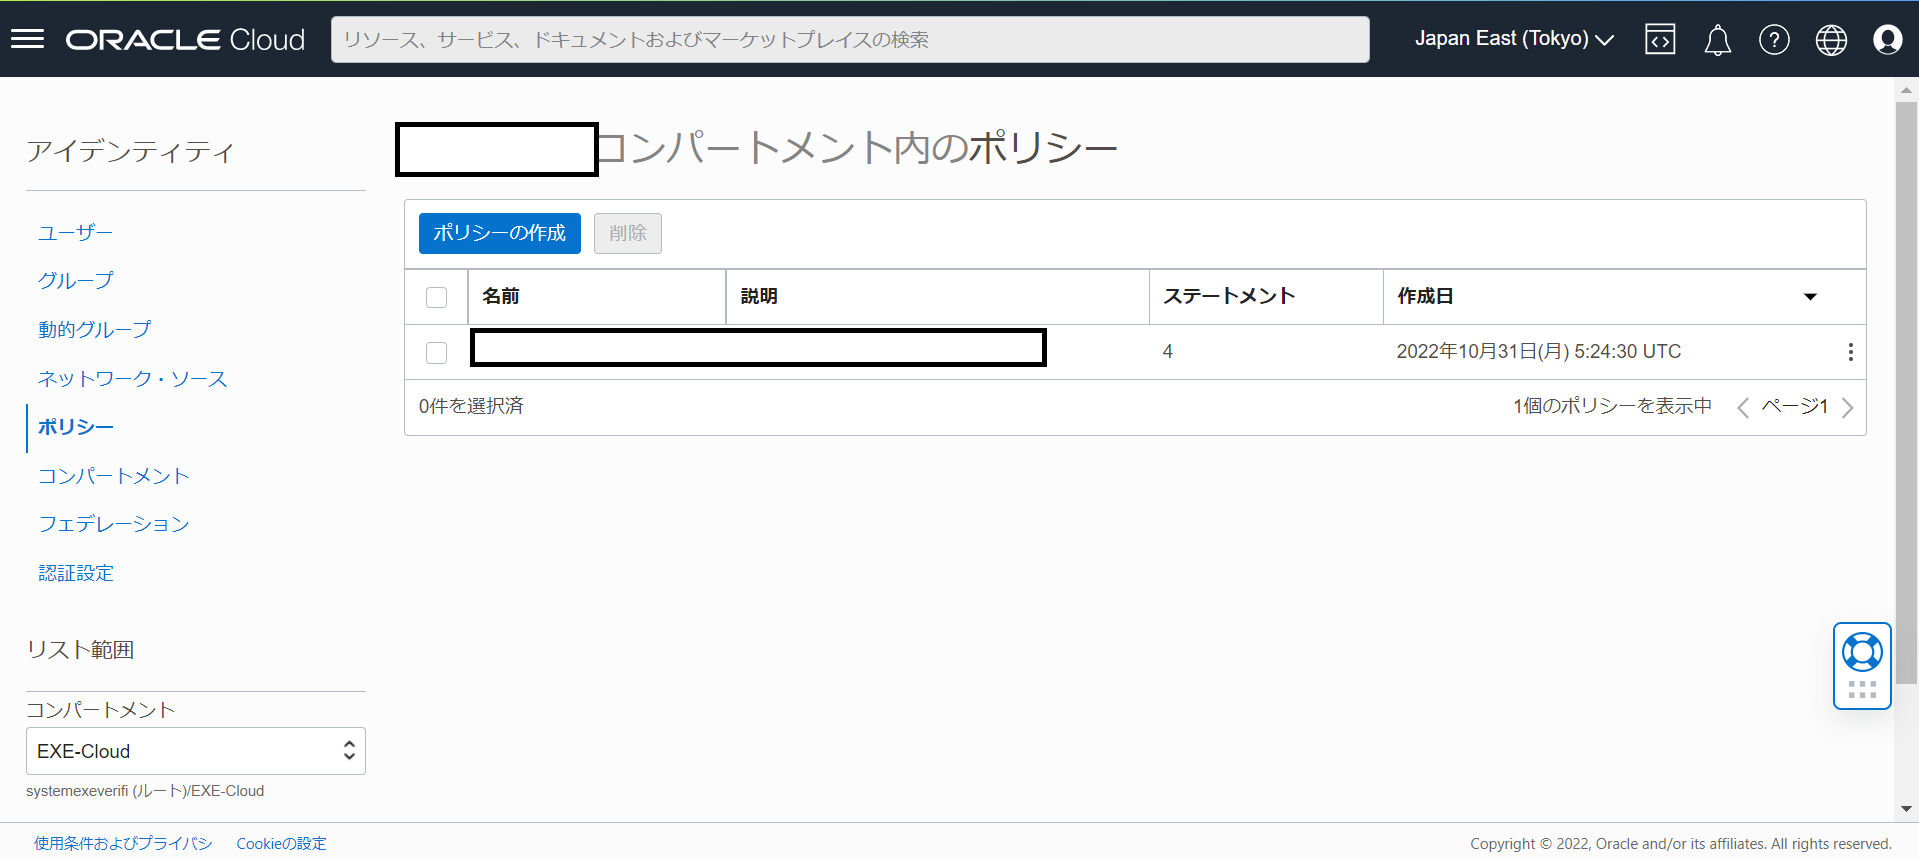 Oracle Cloud Infrastructure Functionsではじめるサーバレス入門 2